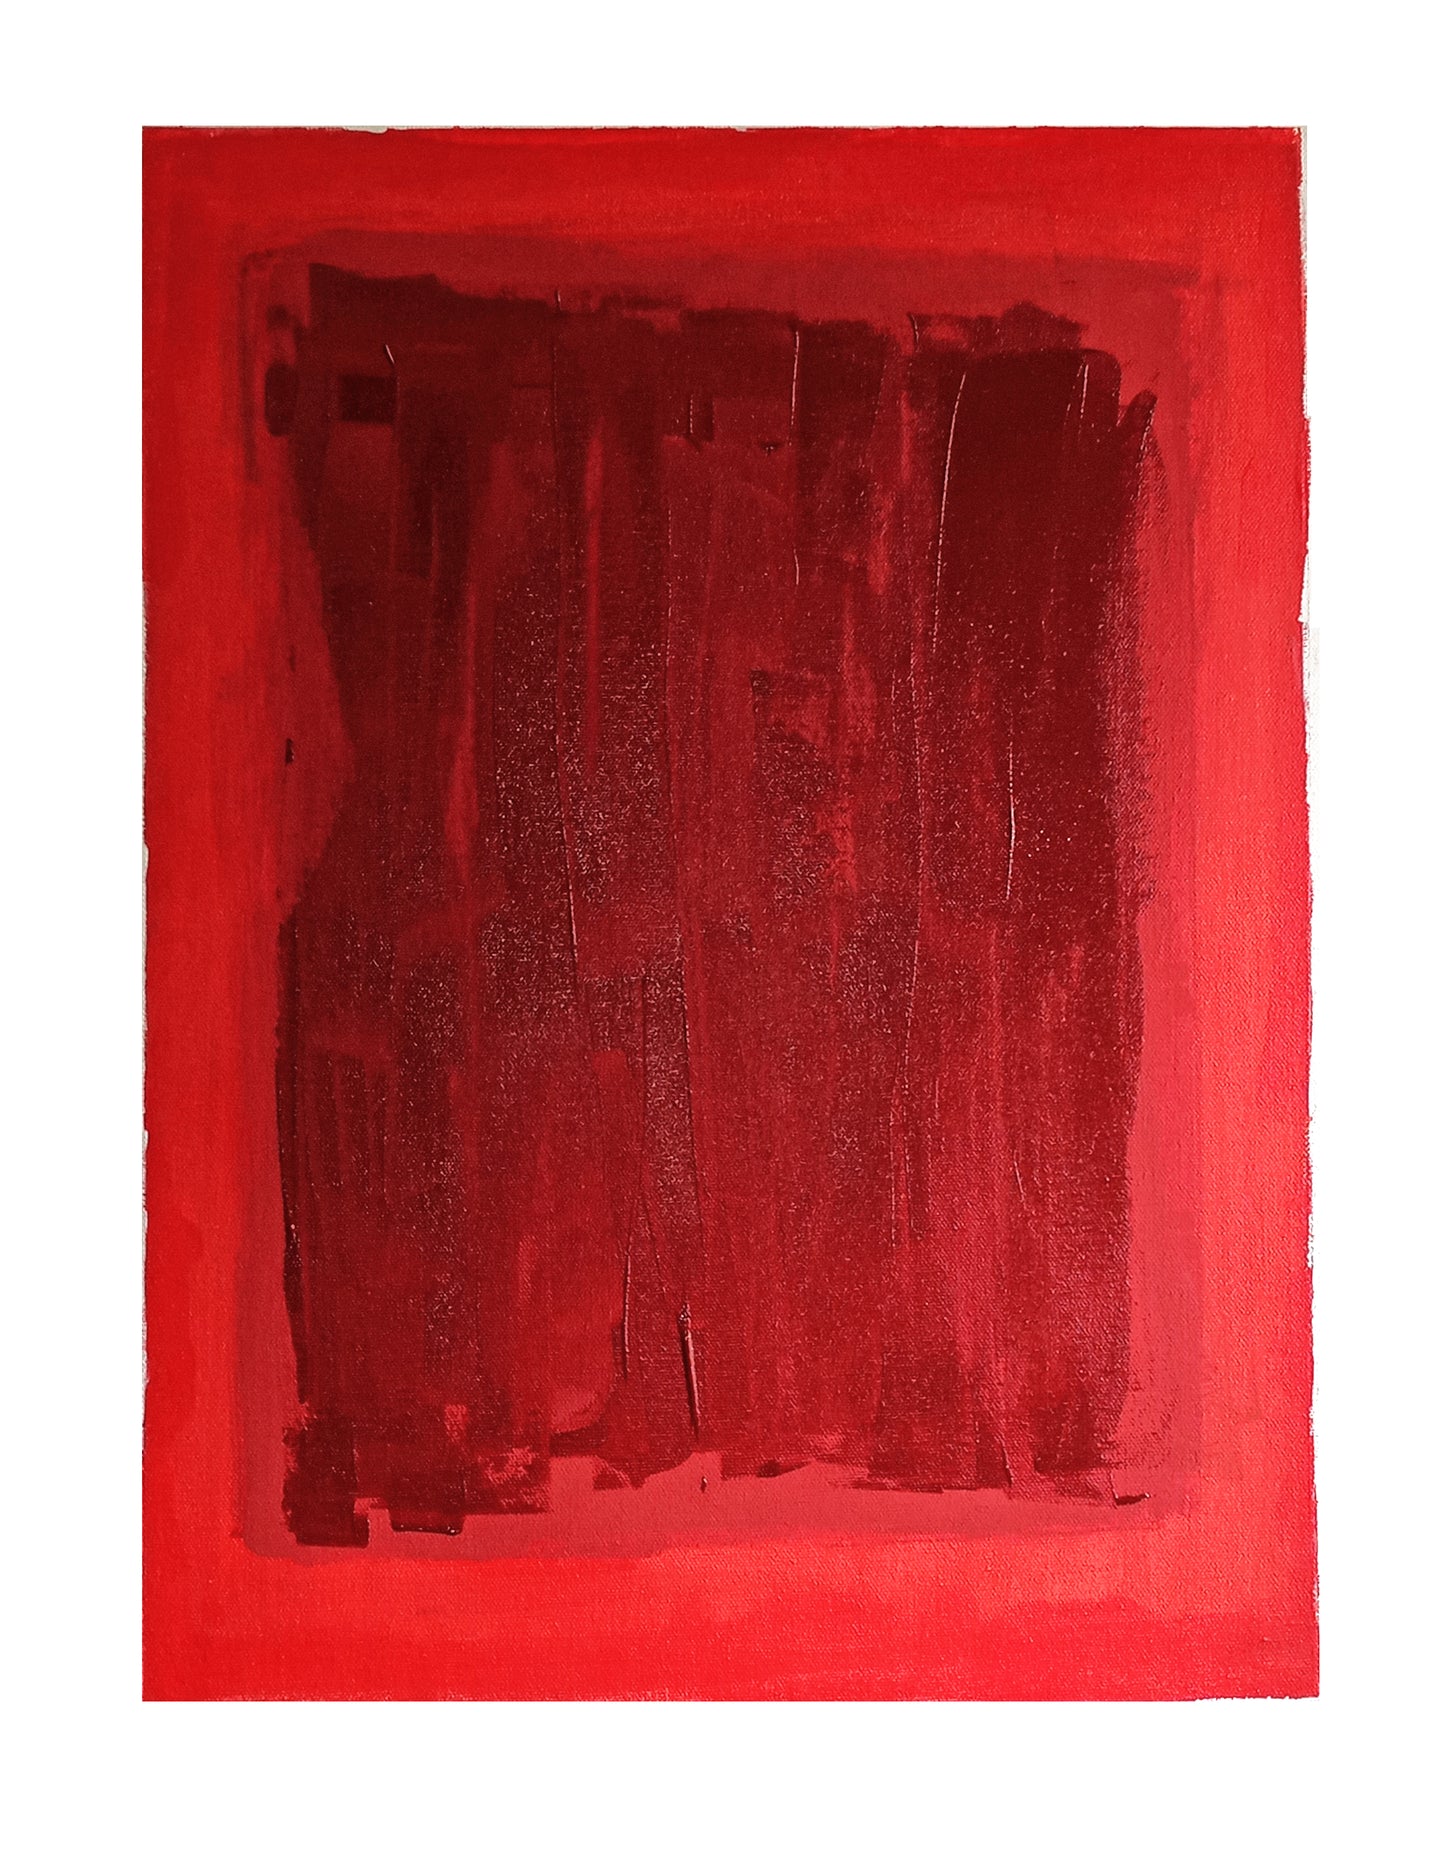 The Red Carpet 18"x24"